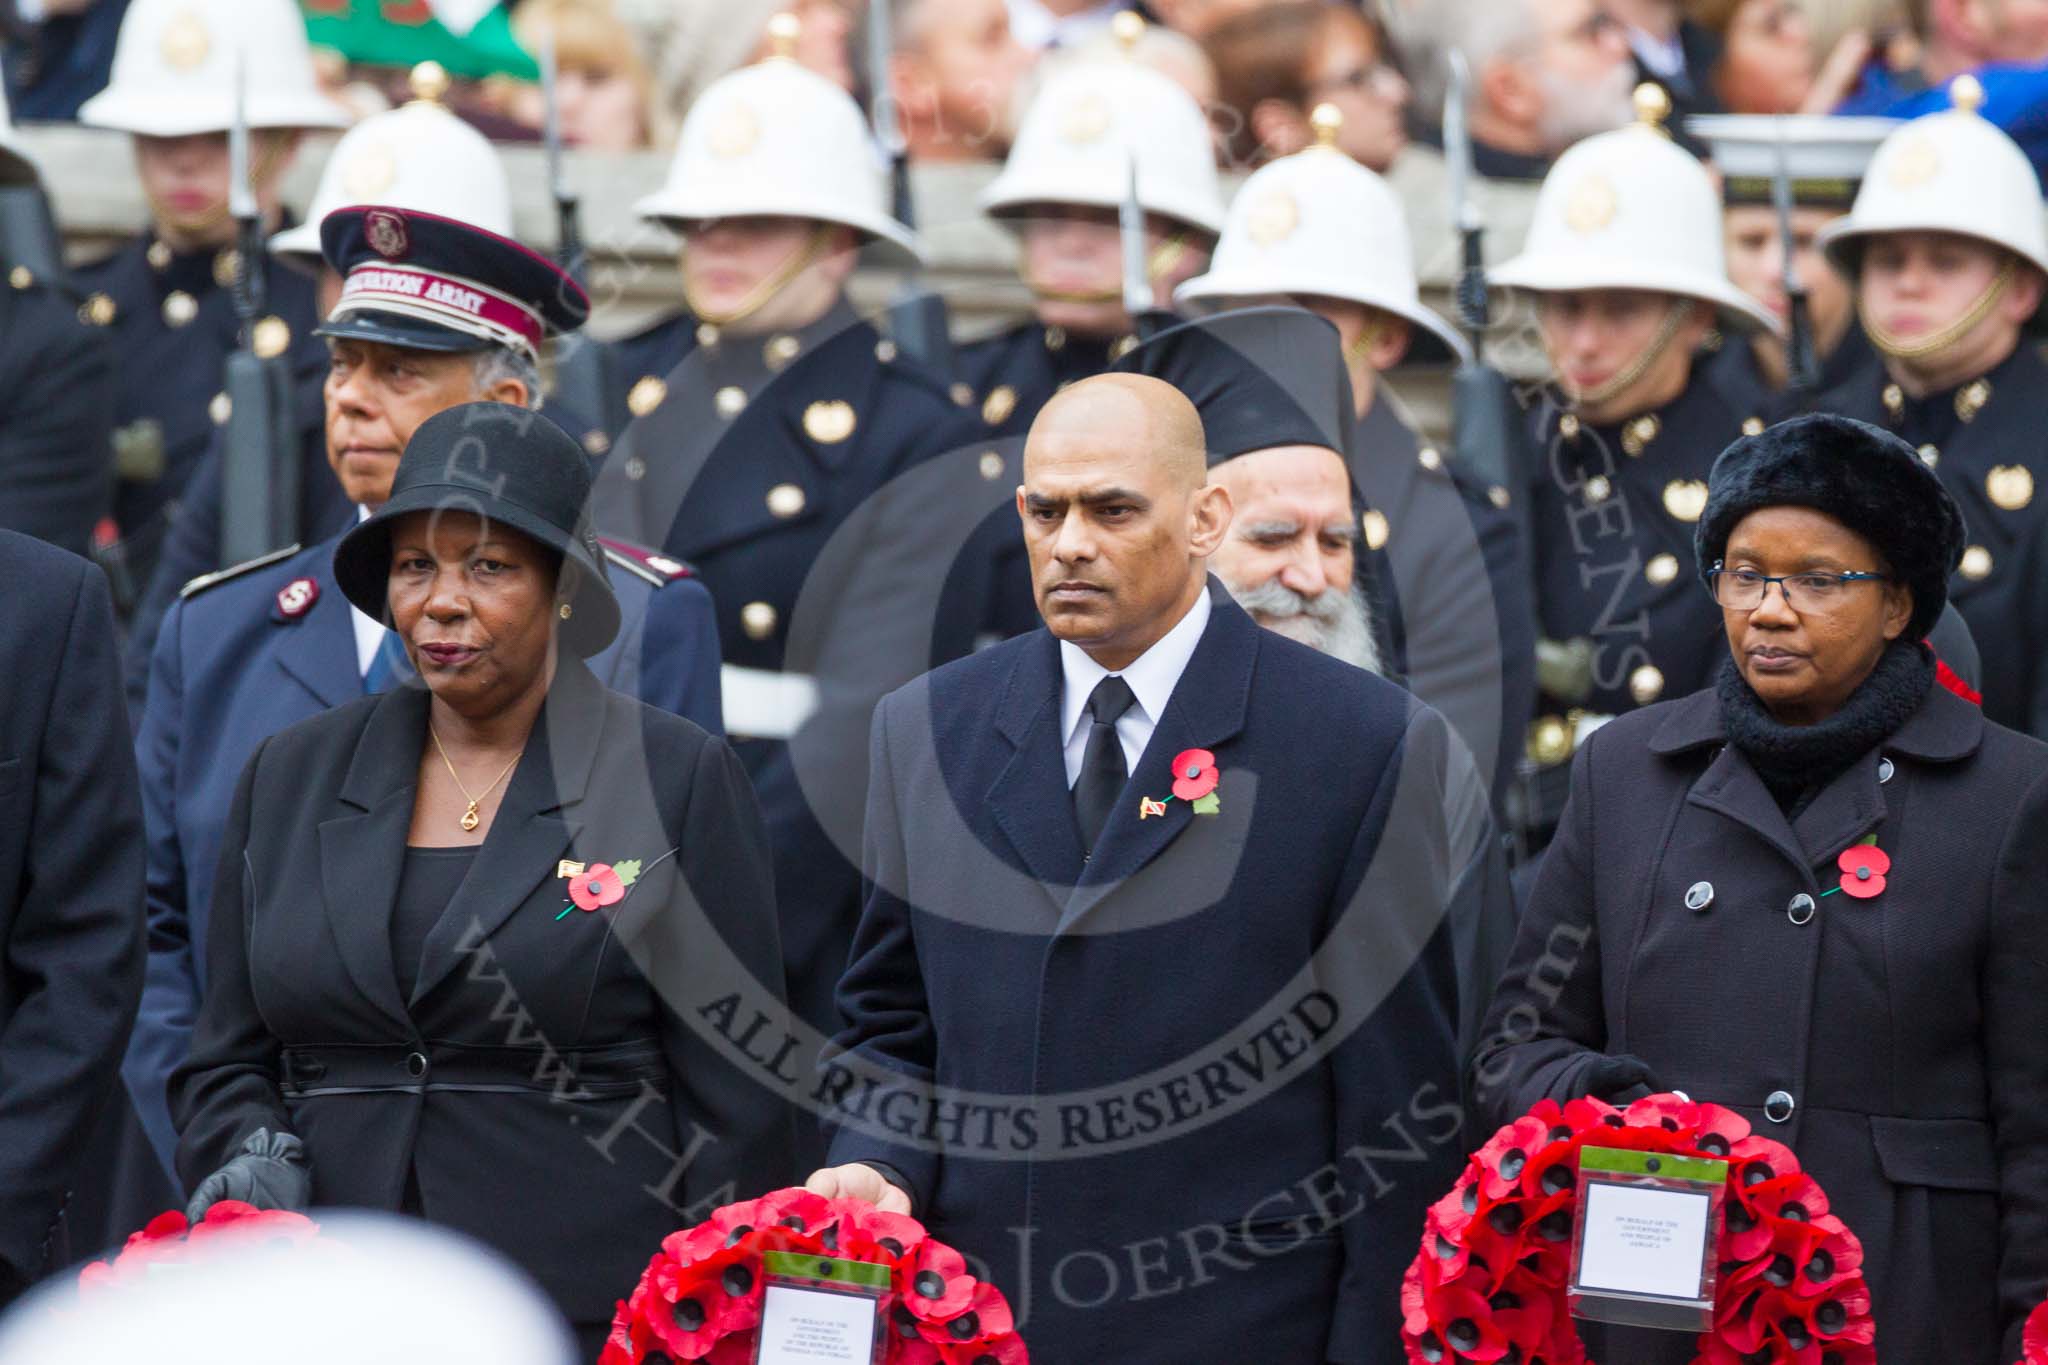 Remembrance Sunday at the Cenotaph 2015: The High Commissioner of Uganda, the Acting High Commissioner of Trinidad and Tobago, and the Minister Counsellor of Jamaica  with their wreaths at the Cenotaph. Image #112, 08 November 2015 10:57 Whitehall, London, UK